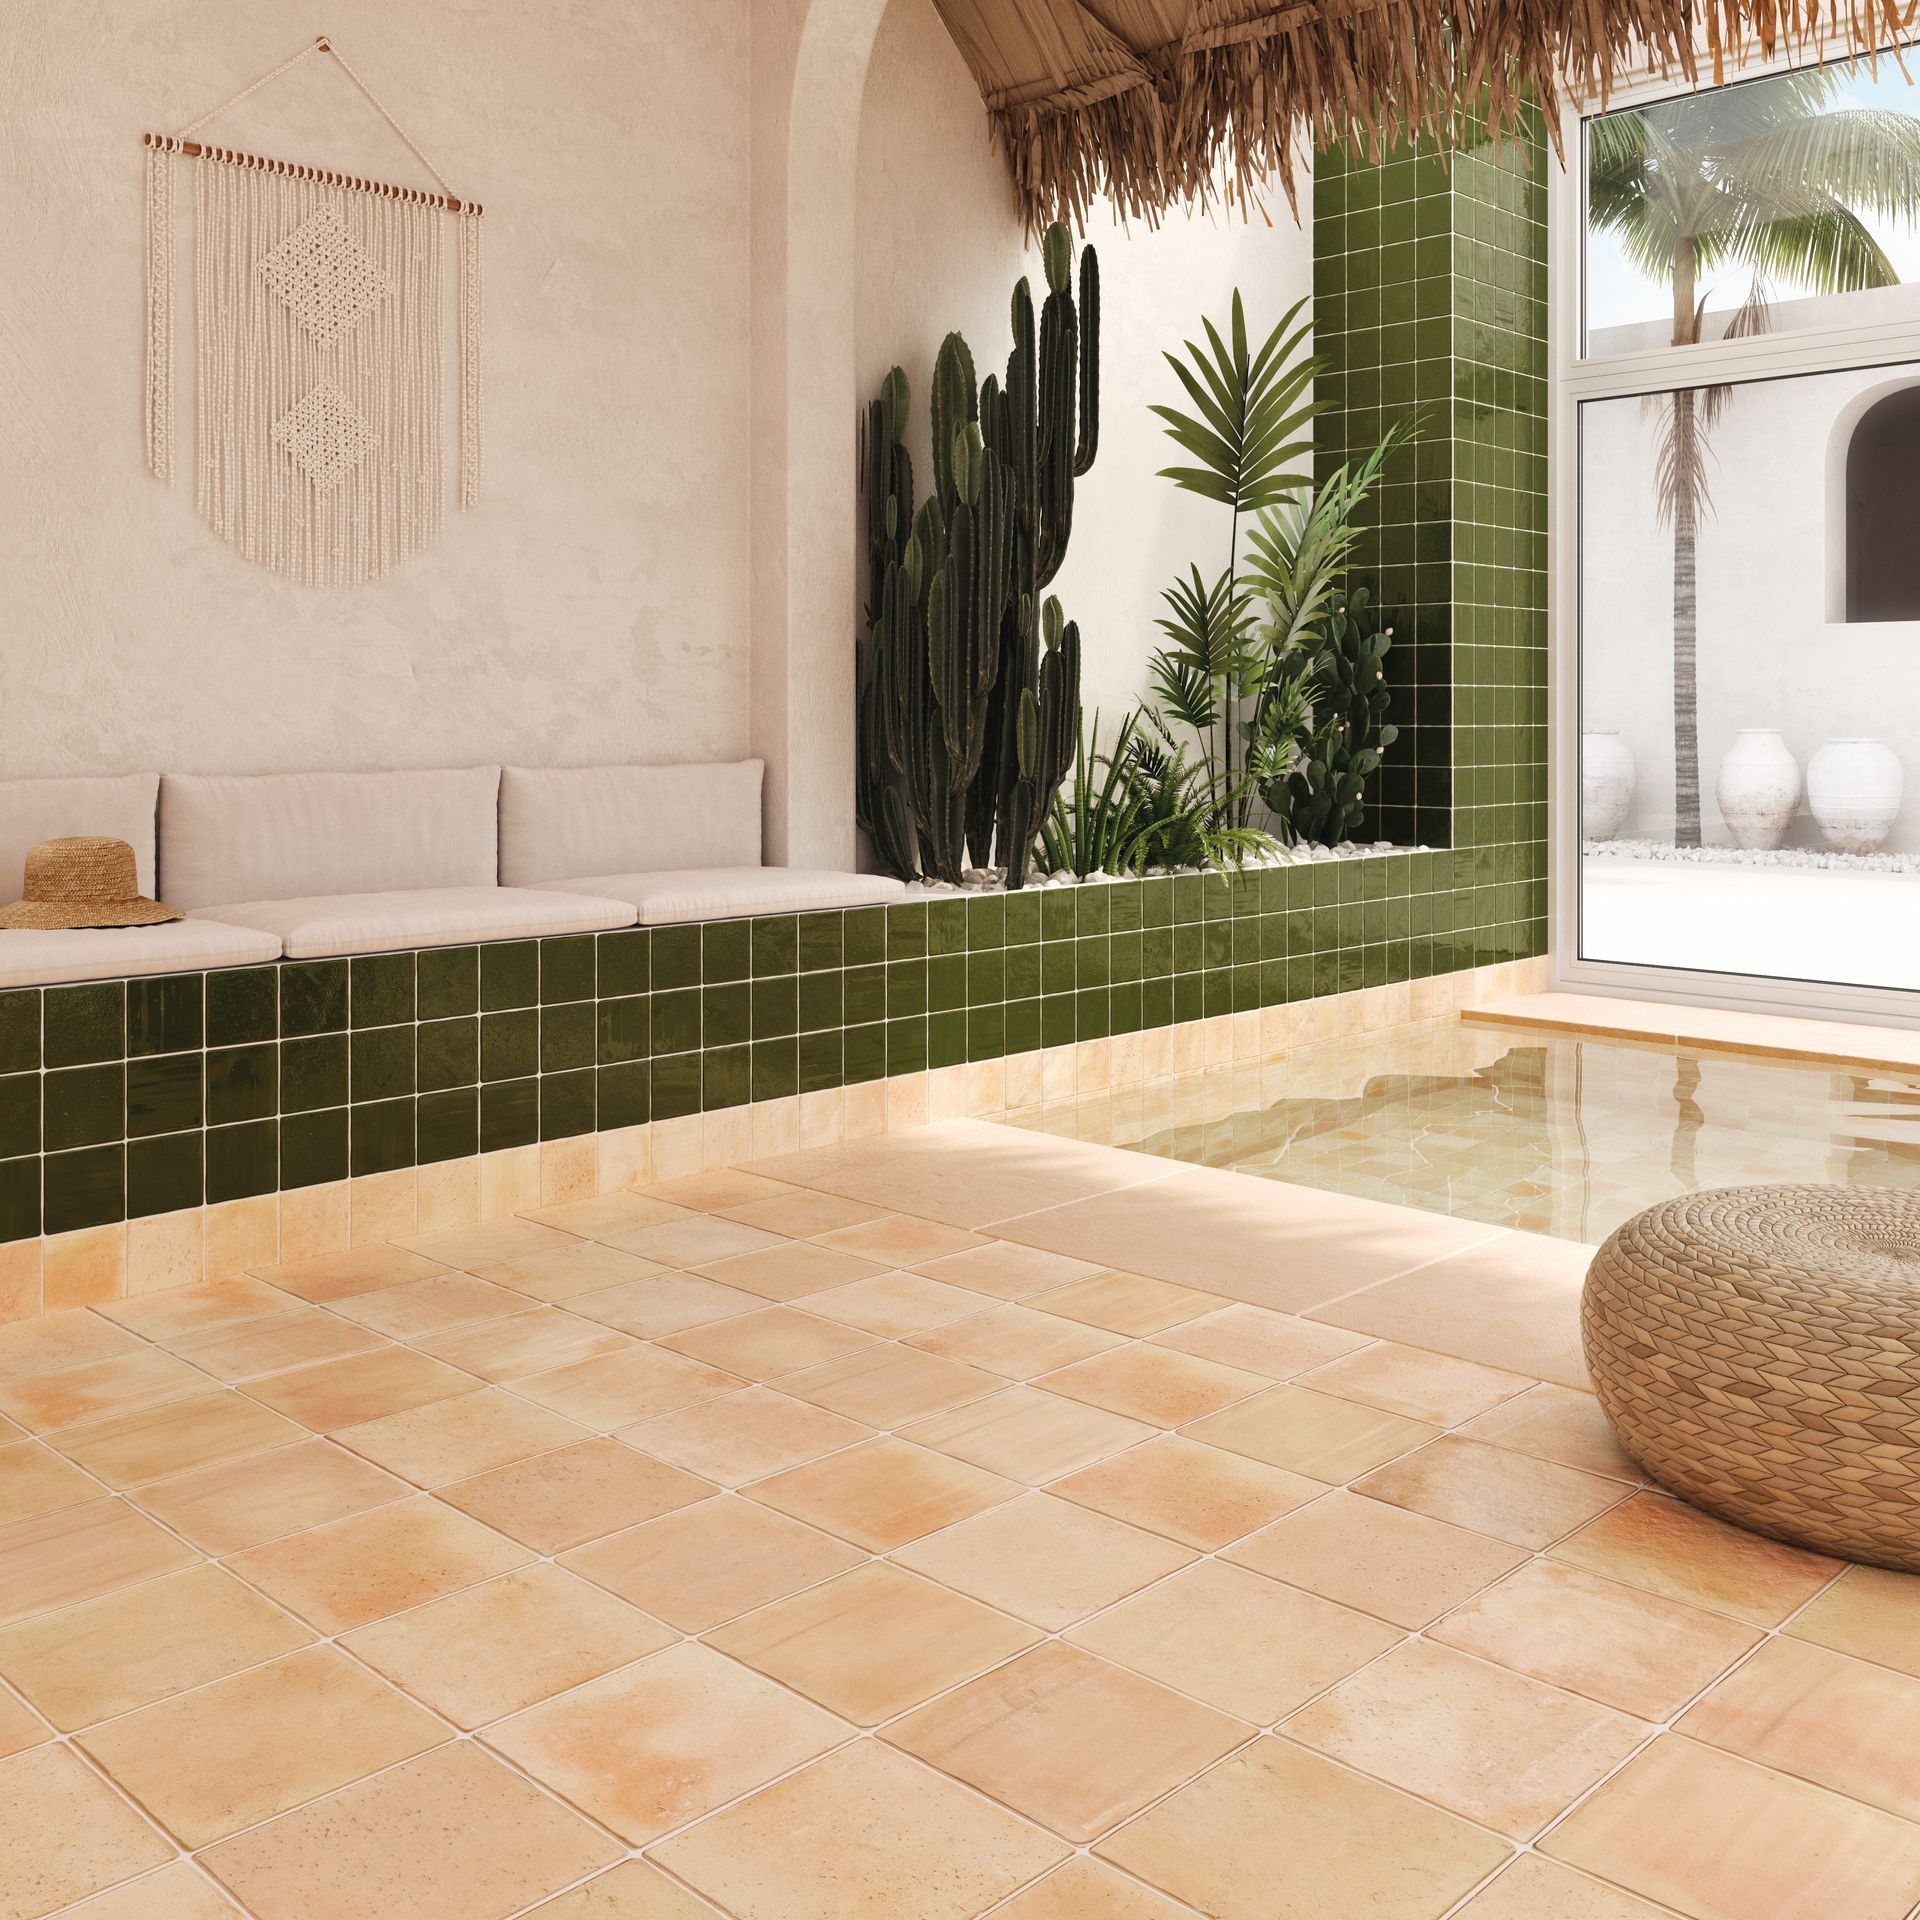 a terracotta effect tiles with a green zellige like tiles ,with a swimming pool next to it